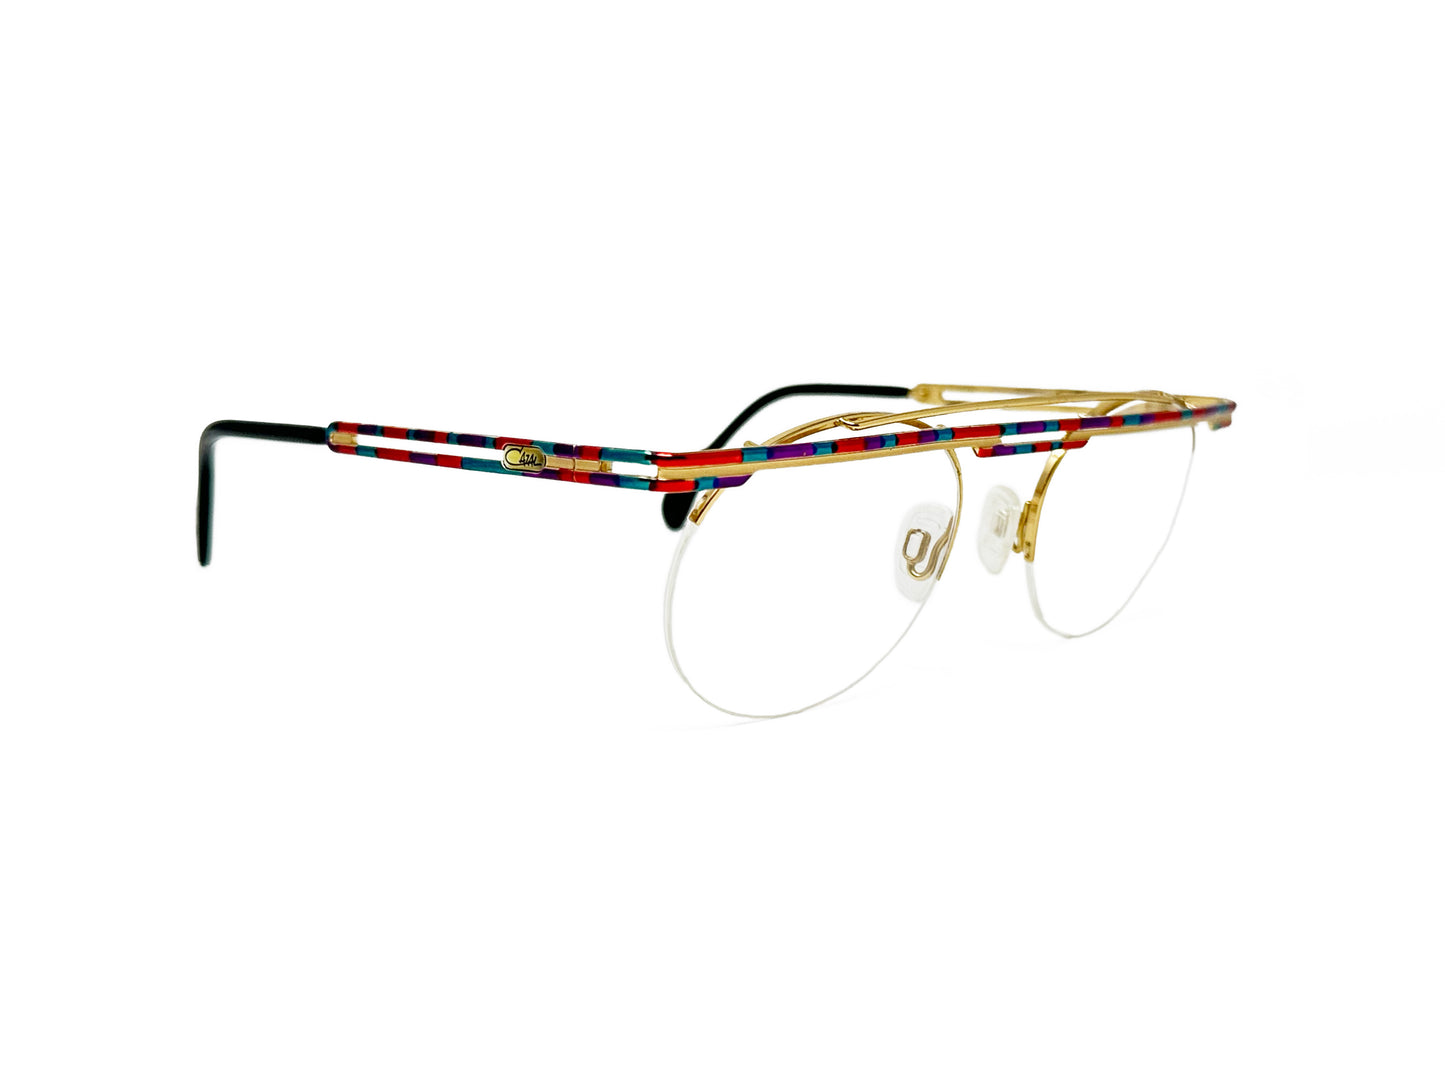 Cazal round optical frame with metal, rainbow colored bar across top. Model: 748. Color: 405 Gold metal with rainbow bar. Side view.